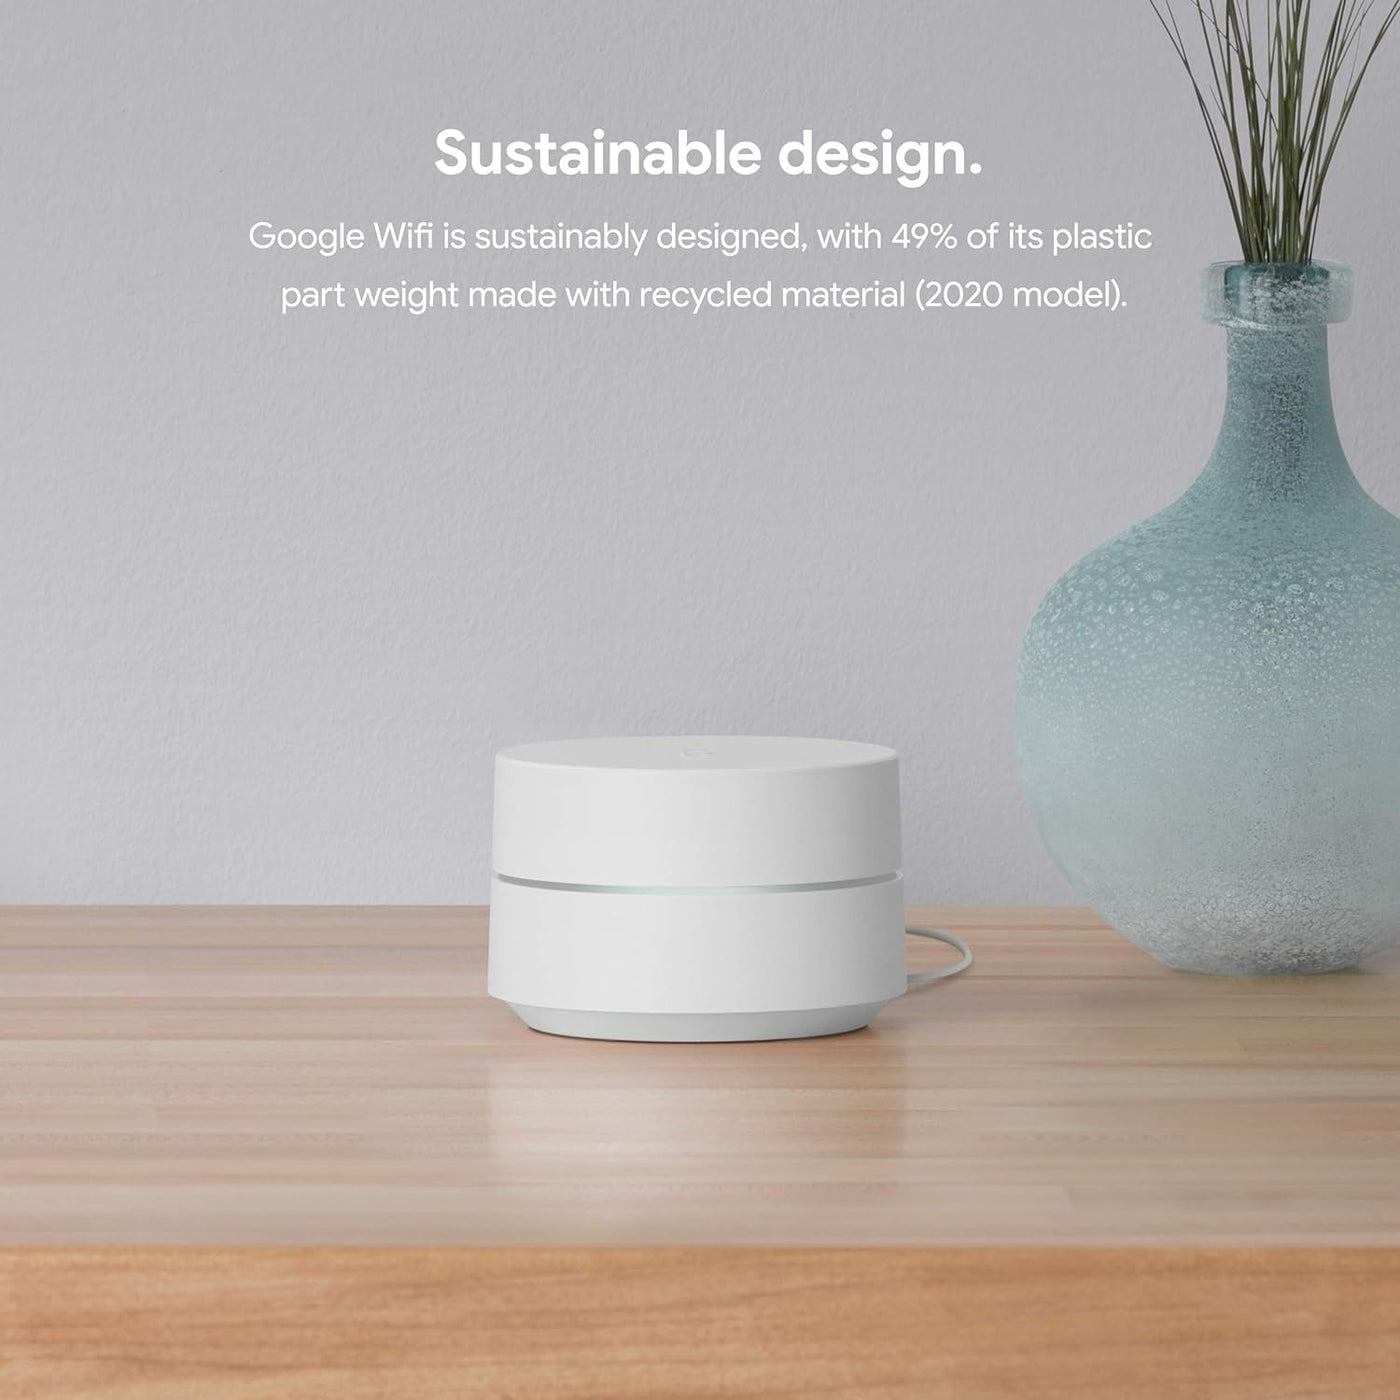 Google - Wifi - Mesh Router (AC1200) - 3 pack - $120